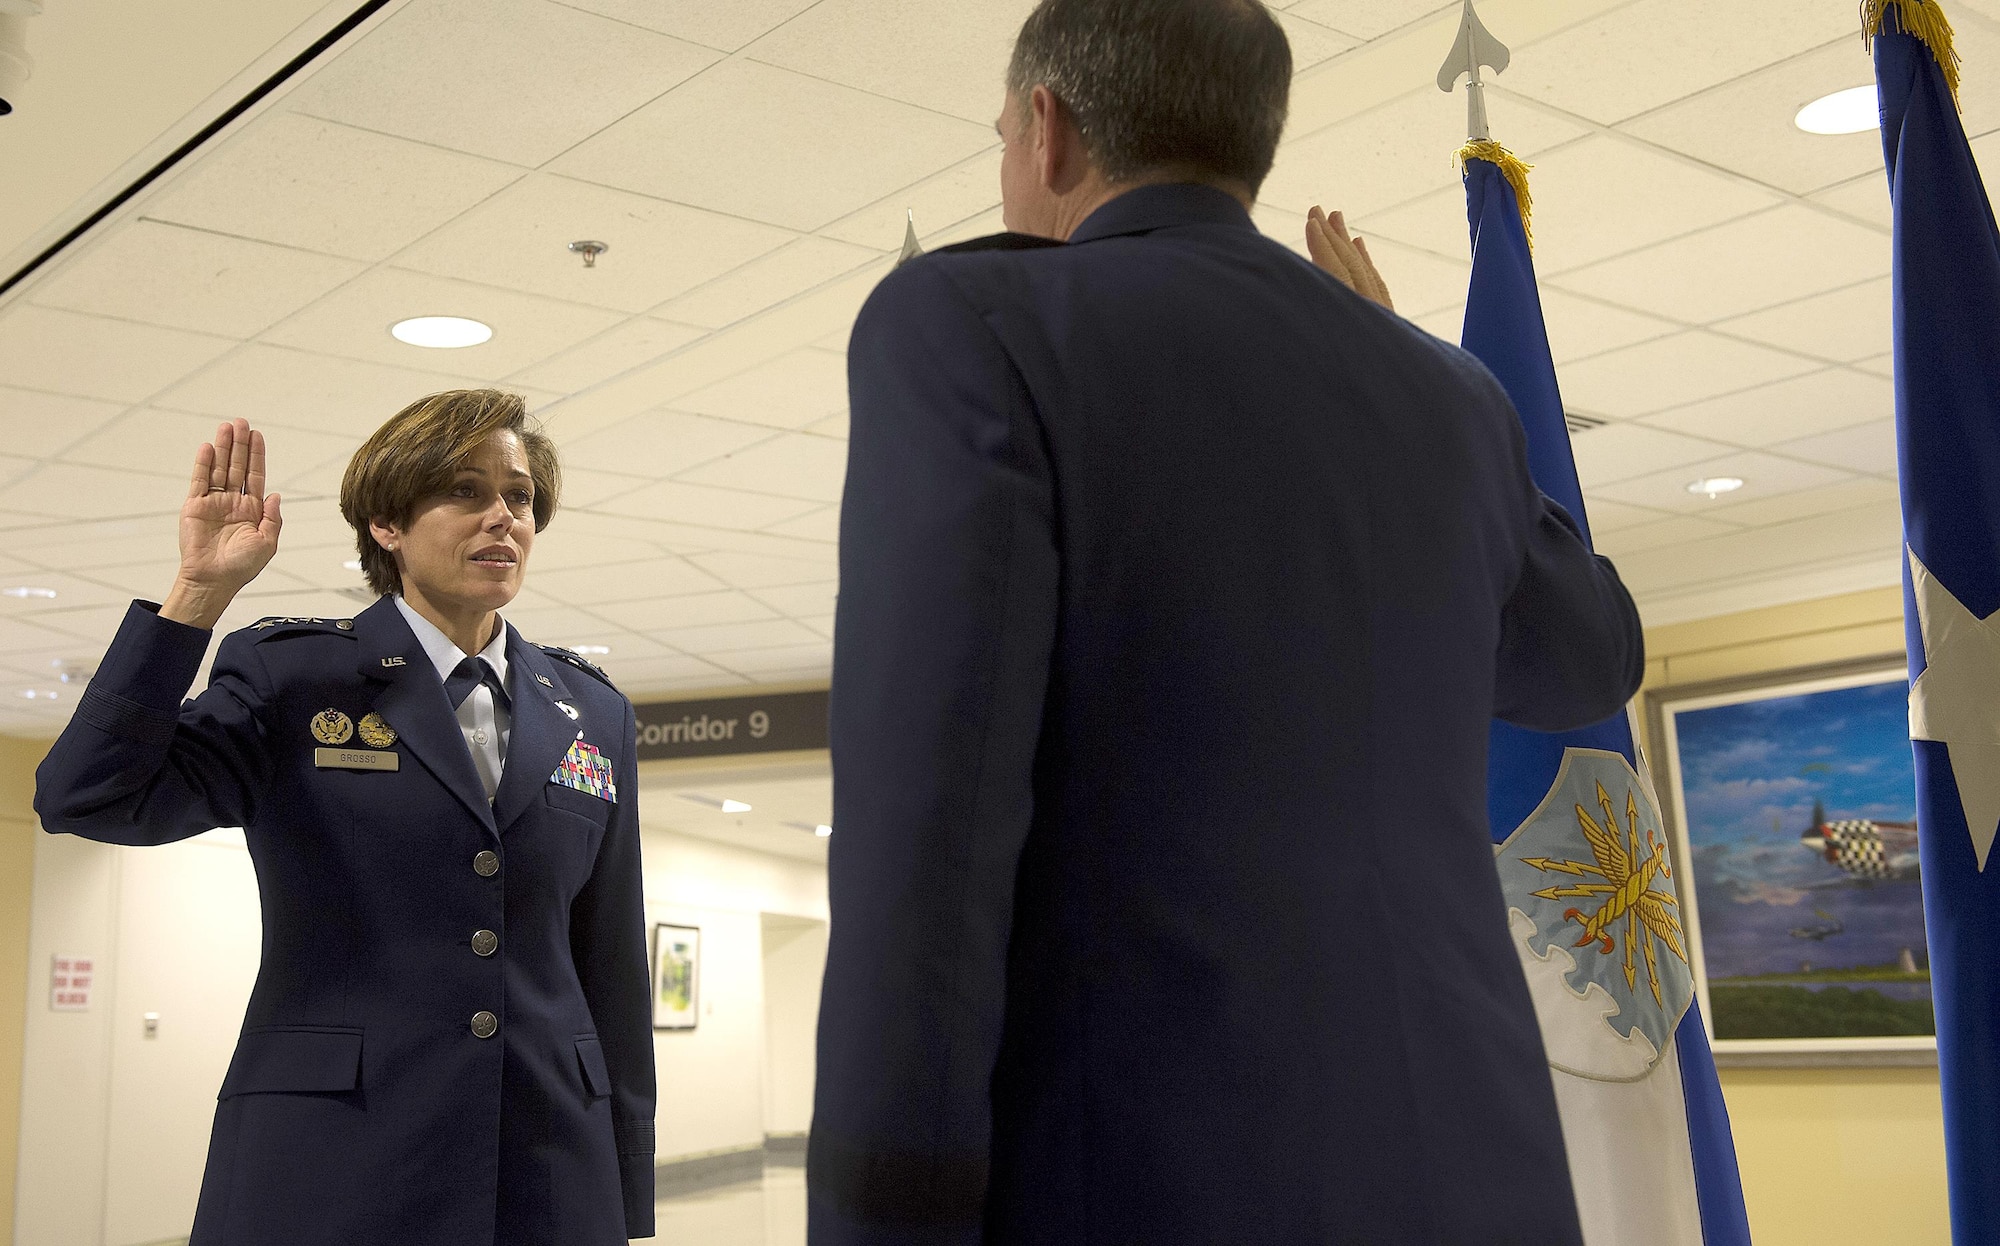 Air Force Vice Chief of Staff Gen. David L. Goldfein, right, gives the oath of office to Lt. Gen. Gina Grosso during her promotion ceremony in the Pentagon, Nov. 16, 2015. Grosso is the 31st Airman to serve as the Air Force's deputy chief of staff for manpower, personnel and services in the 47 years of the position's existence. (U.S. Air Force photo/Jim Varhegyi)